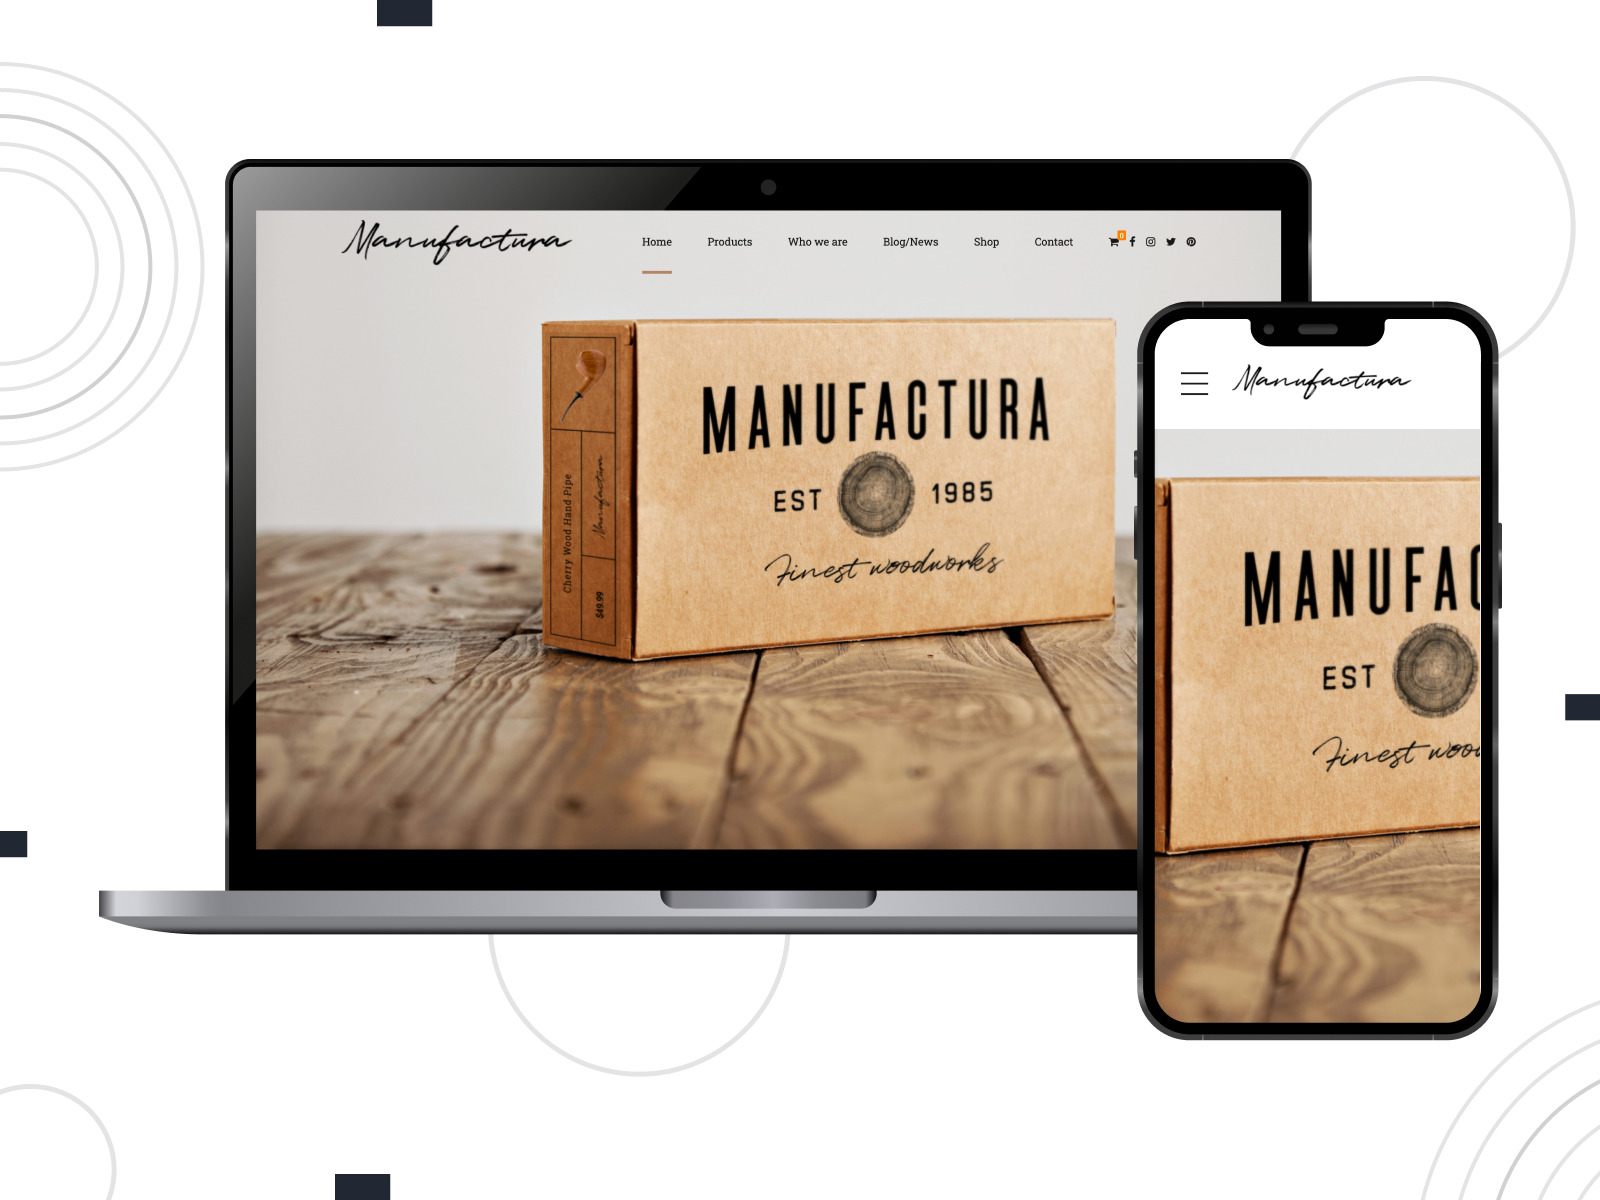 Photo of Manufactura, a minimalistic WordPress theme for handmade stores with blog and gallery layouts in black, lightslategray, and white chromatic scheme.